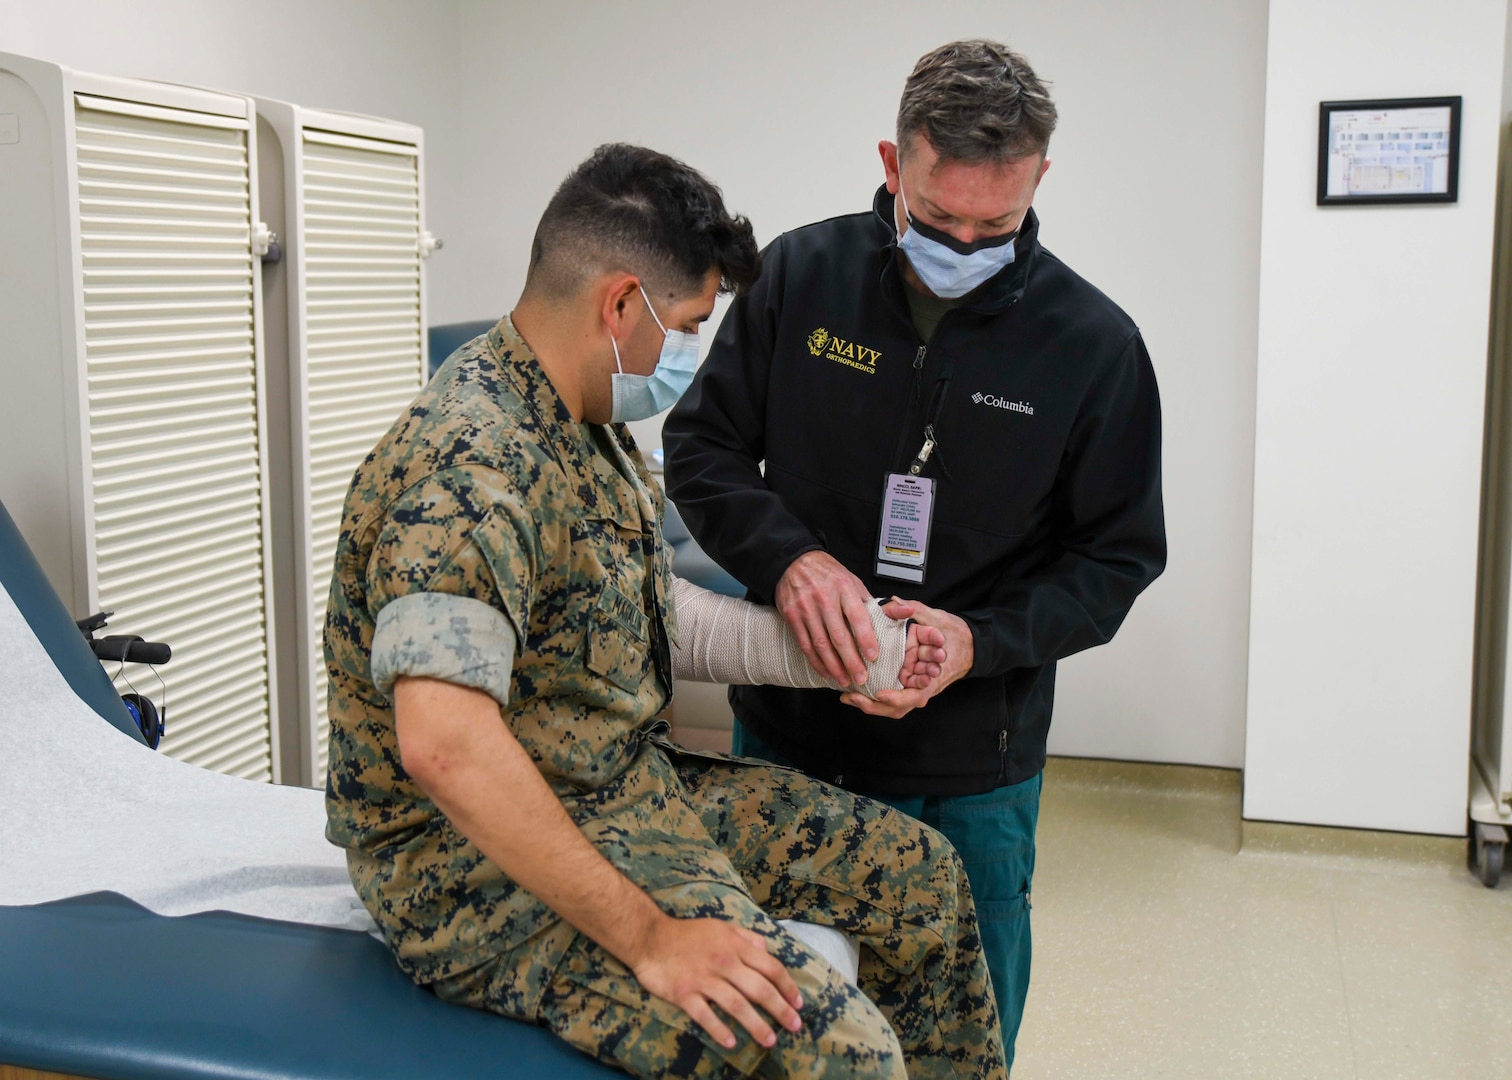 U.S. Navy Lieutenant Commander Douglas Weiss, who serves as an orthopedic surgeon at NMCCL is also a Team Physician for the men’s USA Hockey Team.